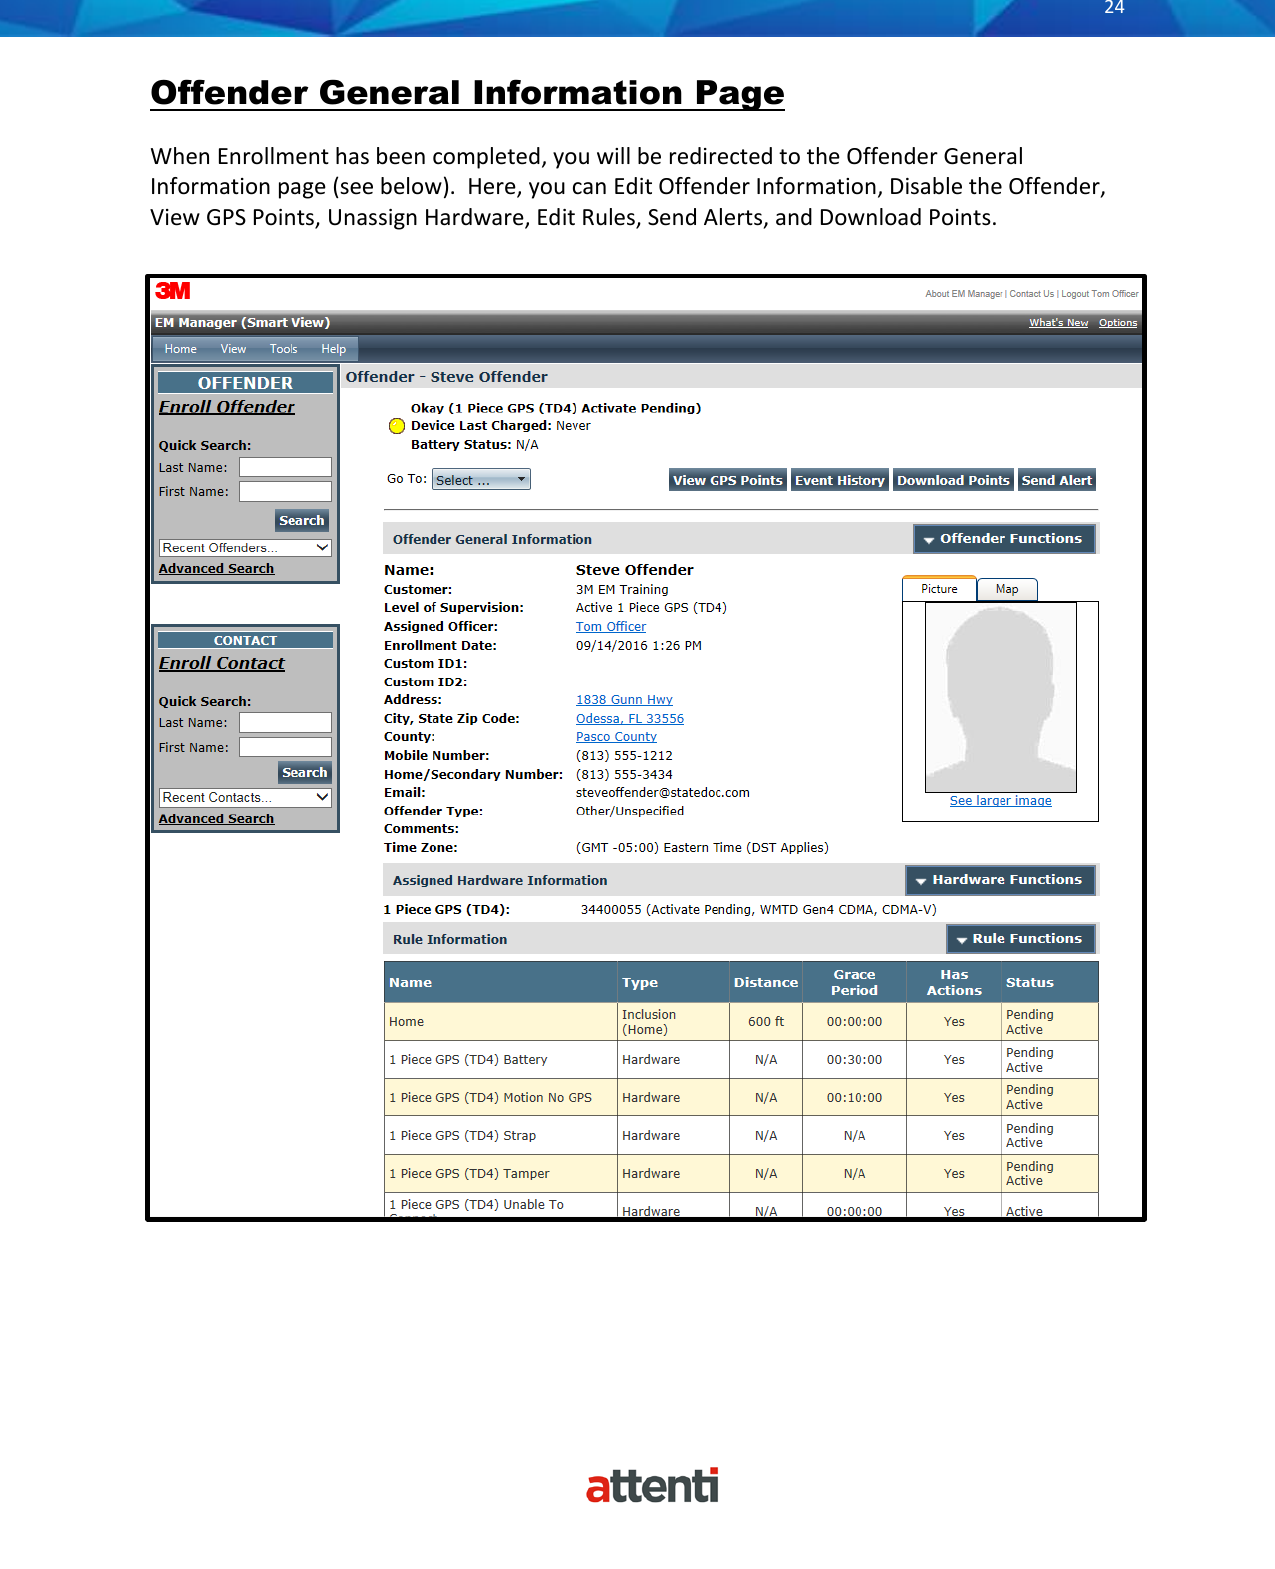       24          Offender General Information Page  When Enrollment has been completed, you will be redirected to the Offender General Information page (see below).  Here, you can Edit Offender Information, Disable the Offender, View GPS Points, Unassign Hardware, Edit Rules, Send Alerts, and Download Points.    